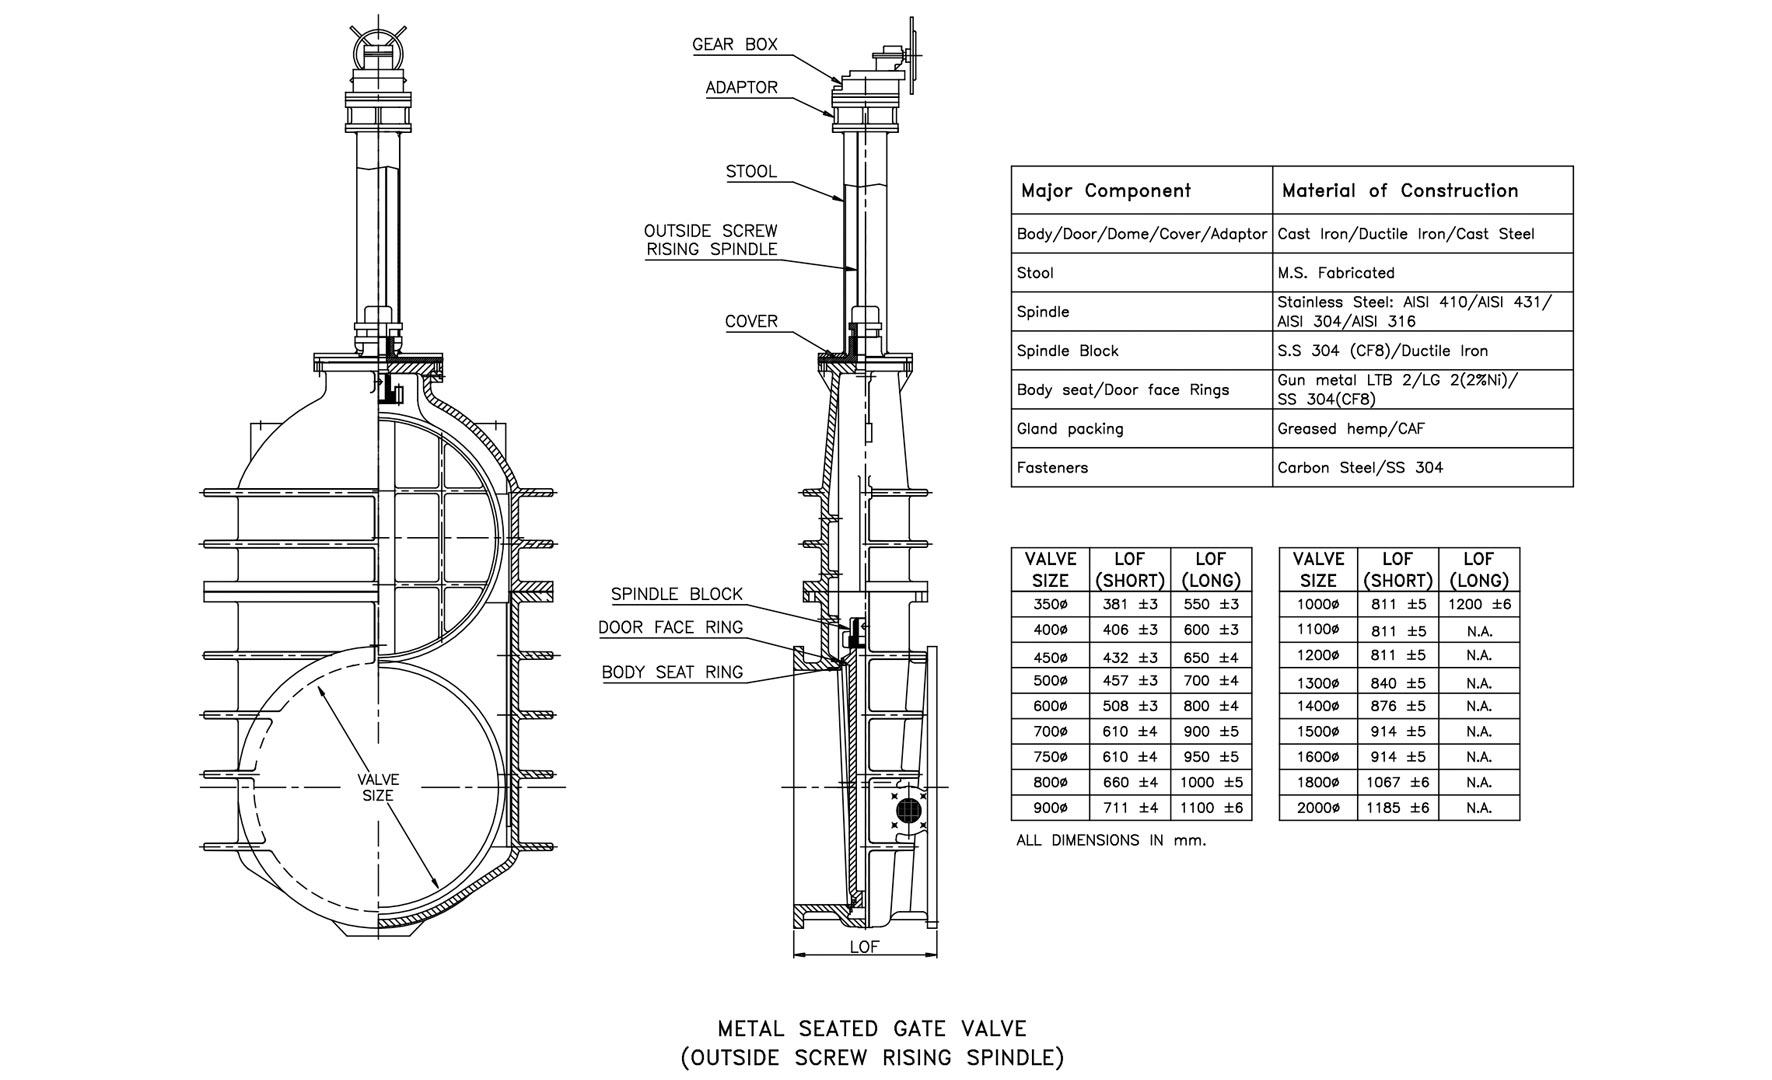 OUTSIDE SCREW RISING SPINDLE GATE VALVE